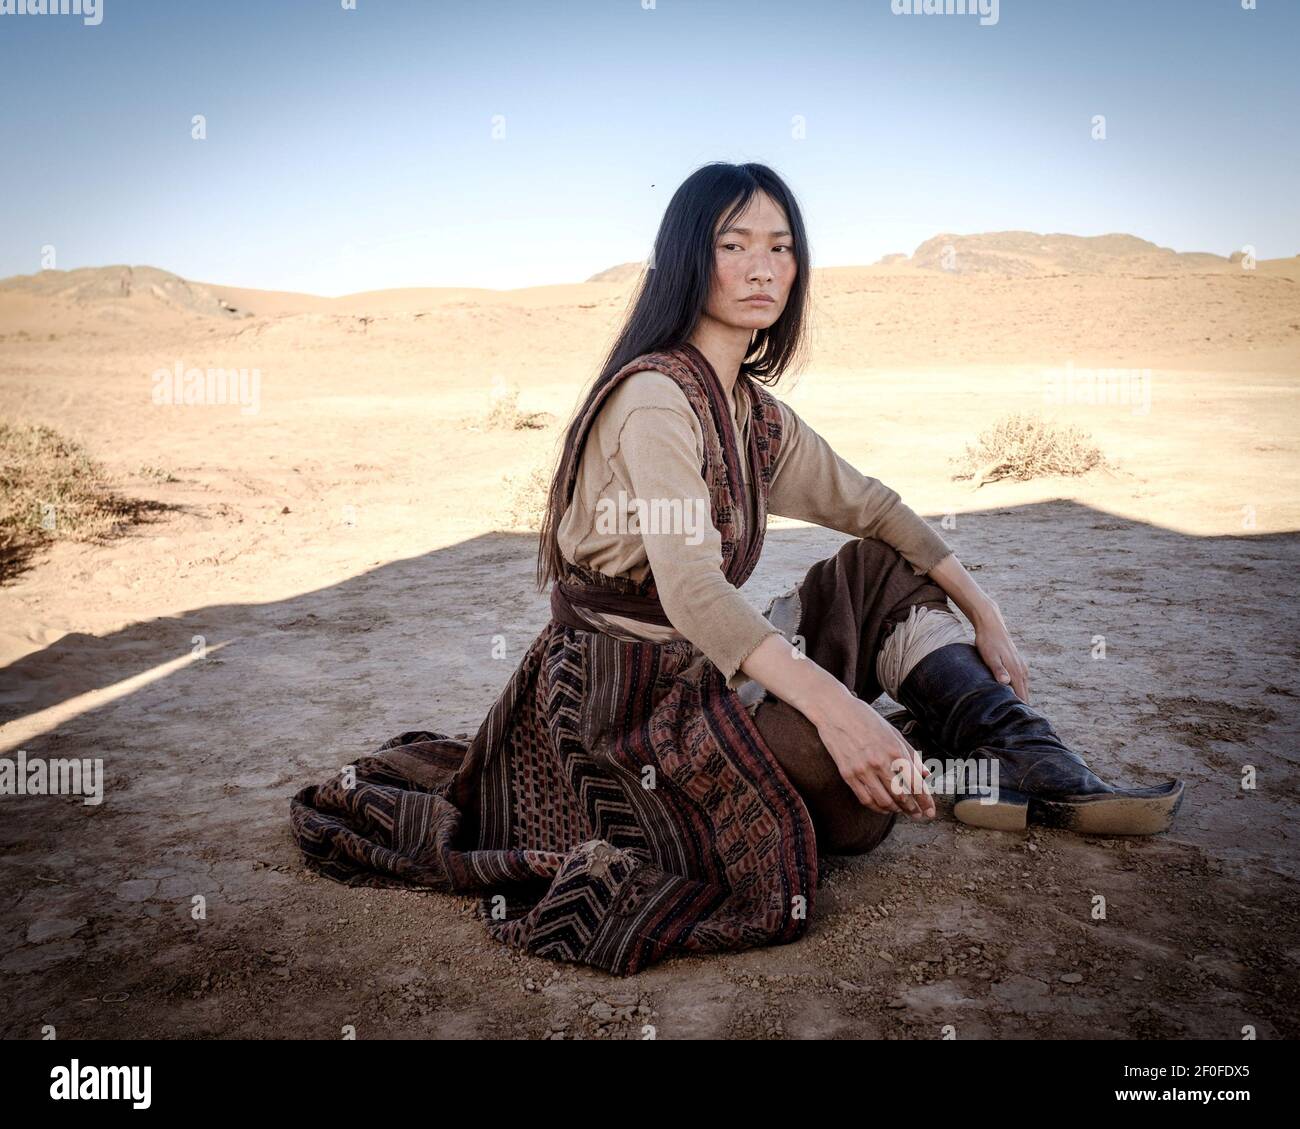 GANA BAYARSAIKHAN in WAITING FOR THE BARBARIANS (2019), directed by CIRO GUERRA. Credit: Iervolino Entertainment / Ithaca Pictures / Album Stock Photo